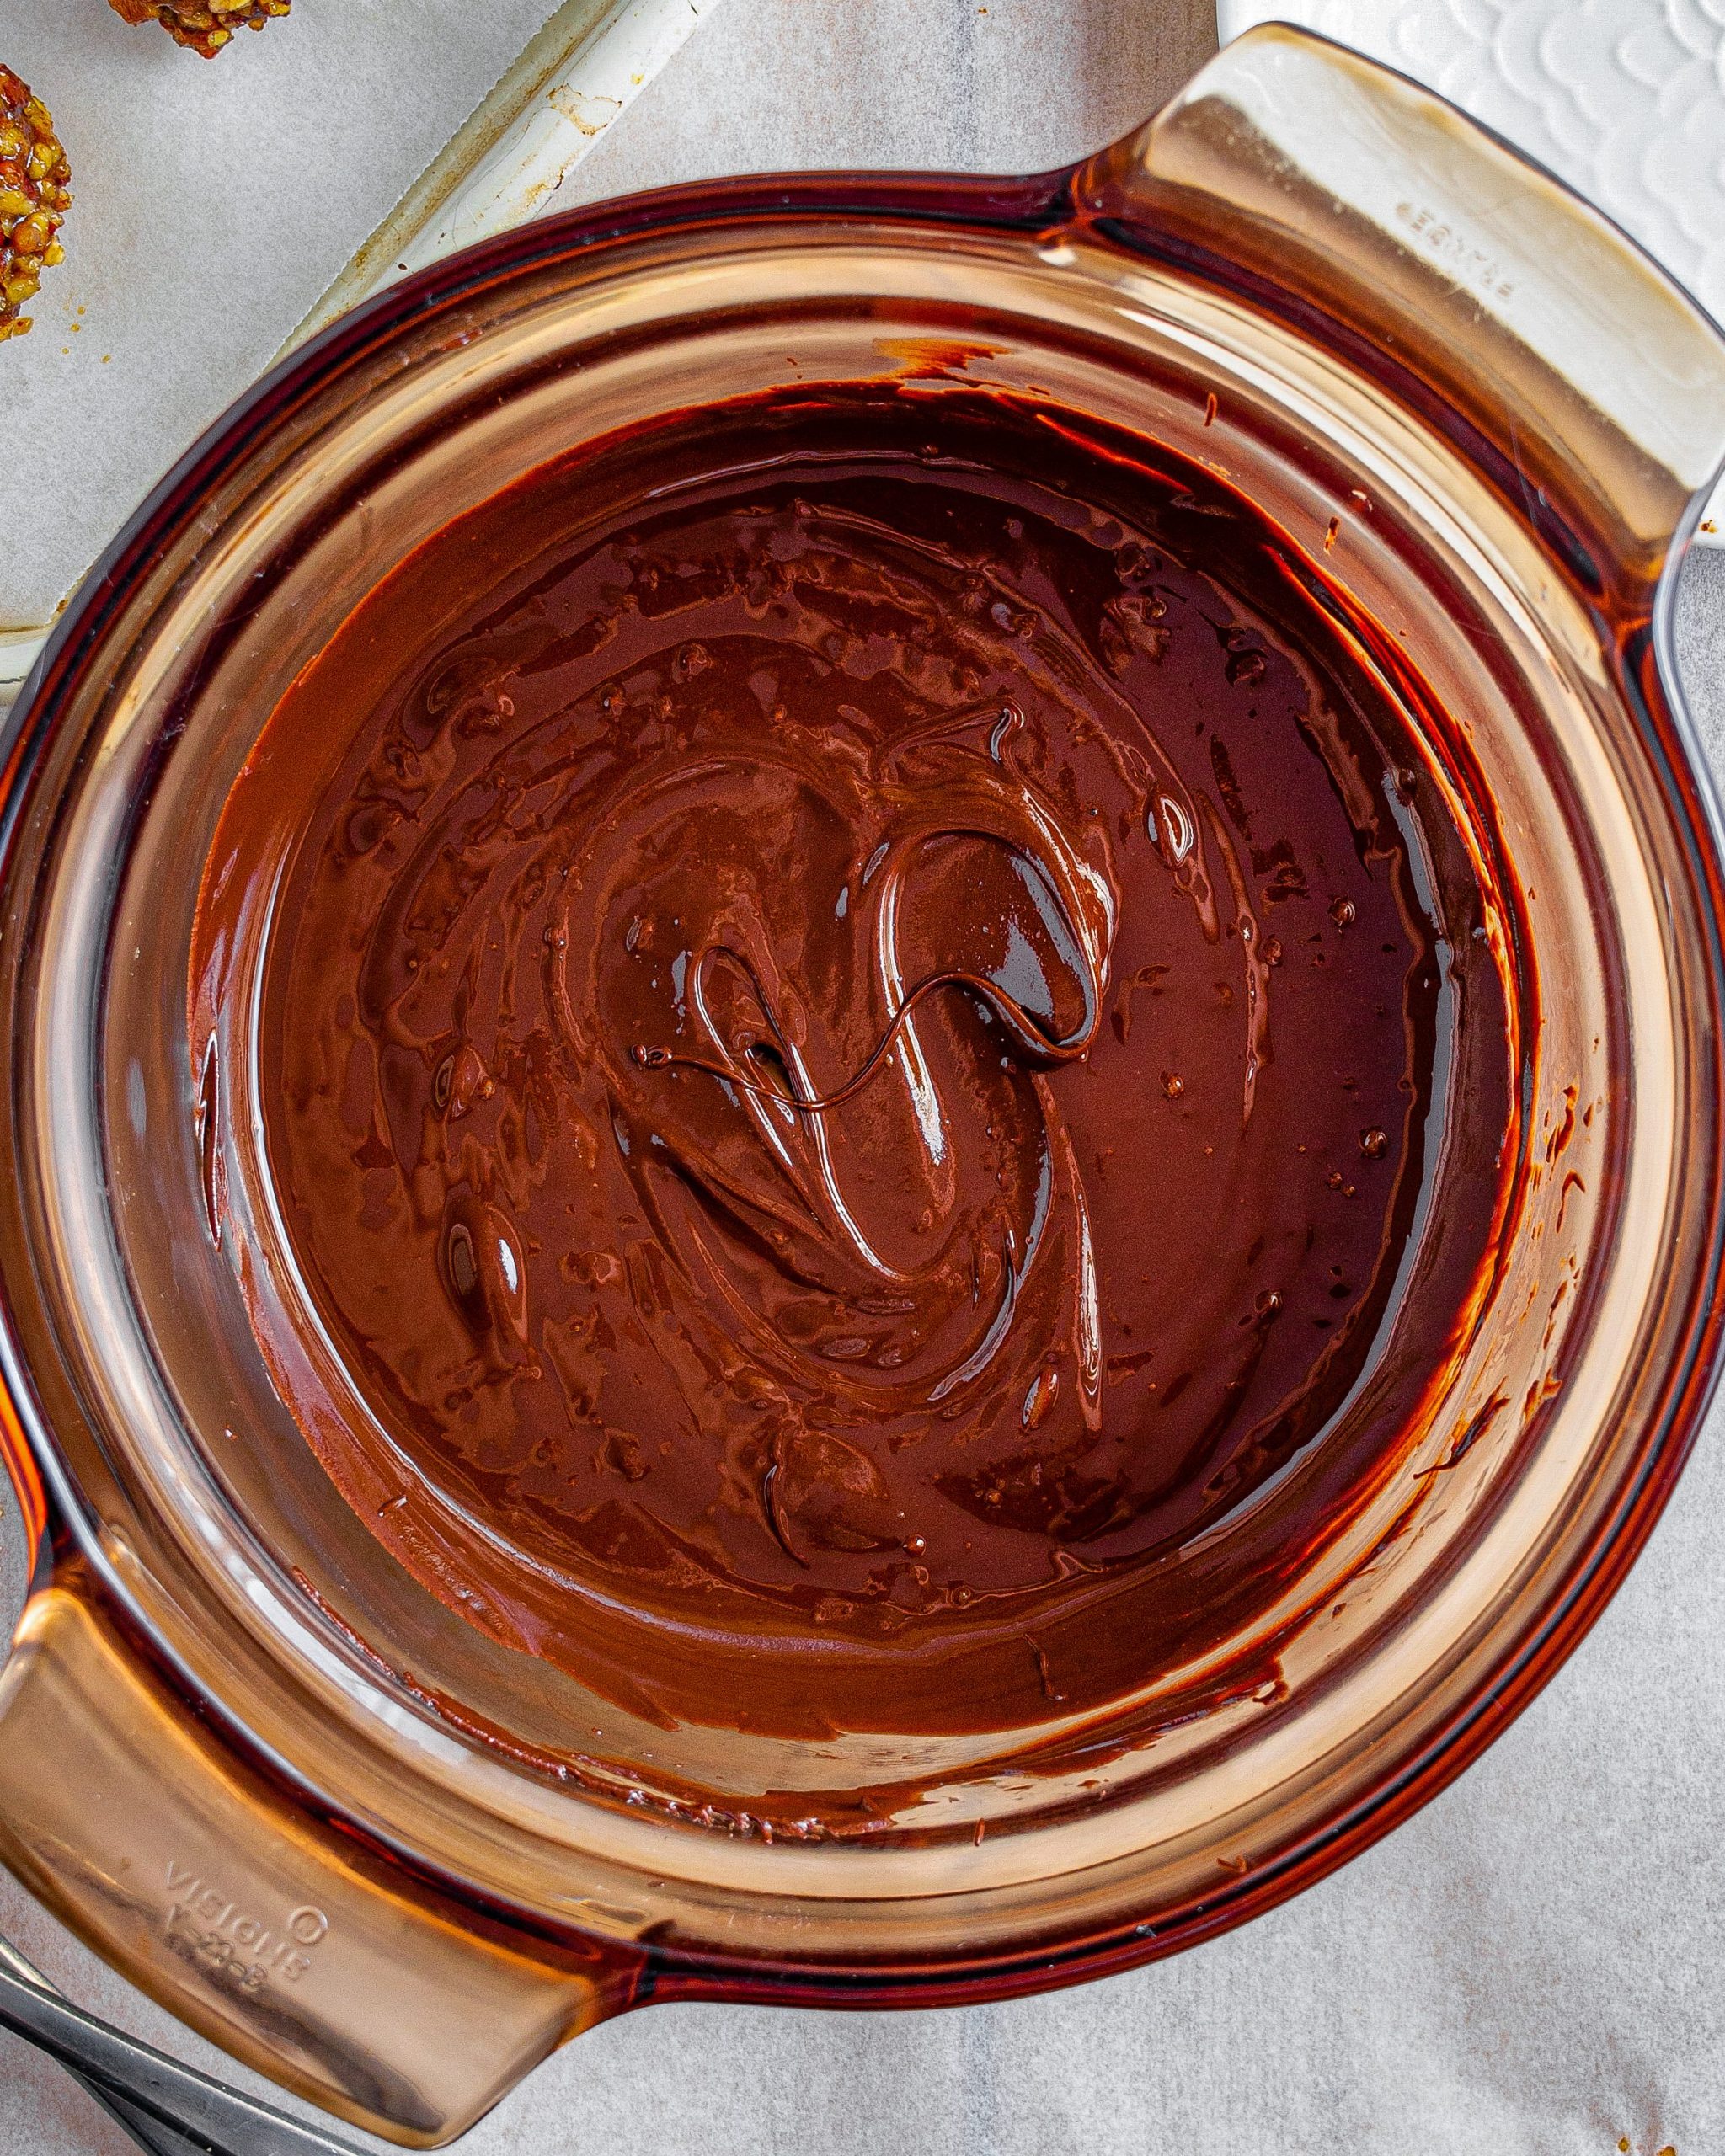 Heat the chocolate in a microwave-safe bowl at 30-second intervals until completely melted.